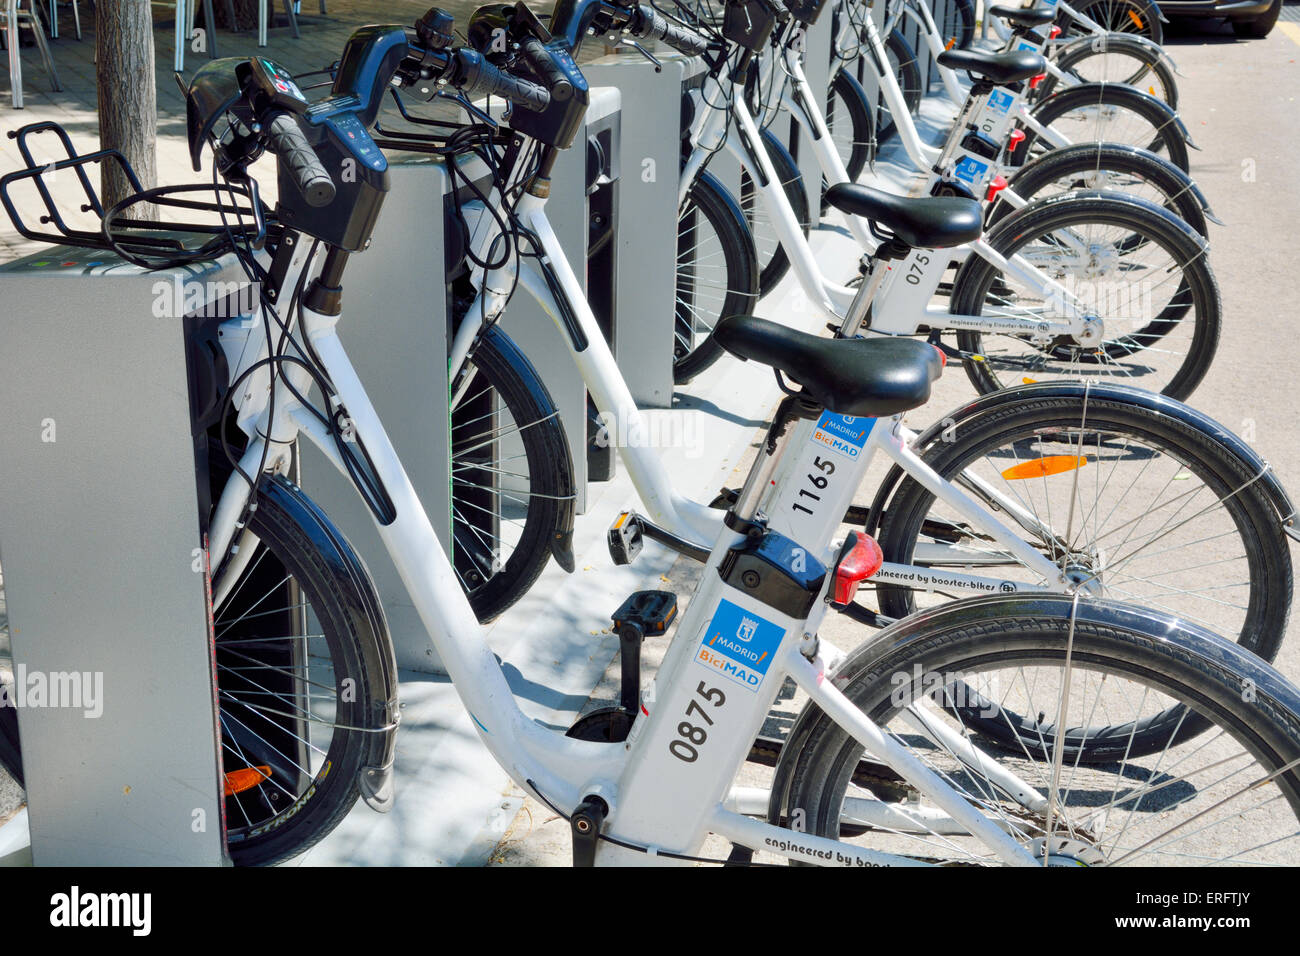 Row of for hire BiciMad electric bikes in their charging stands, Madrid, Spain Stock Photo